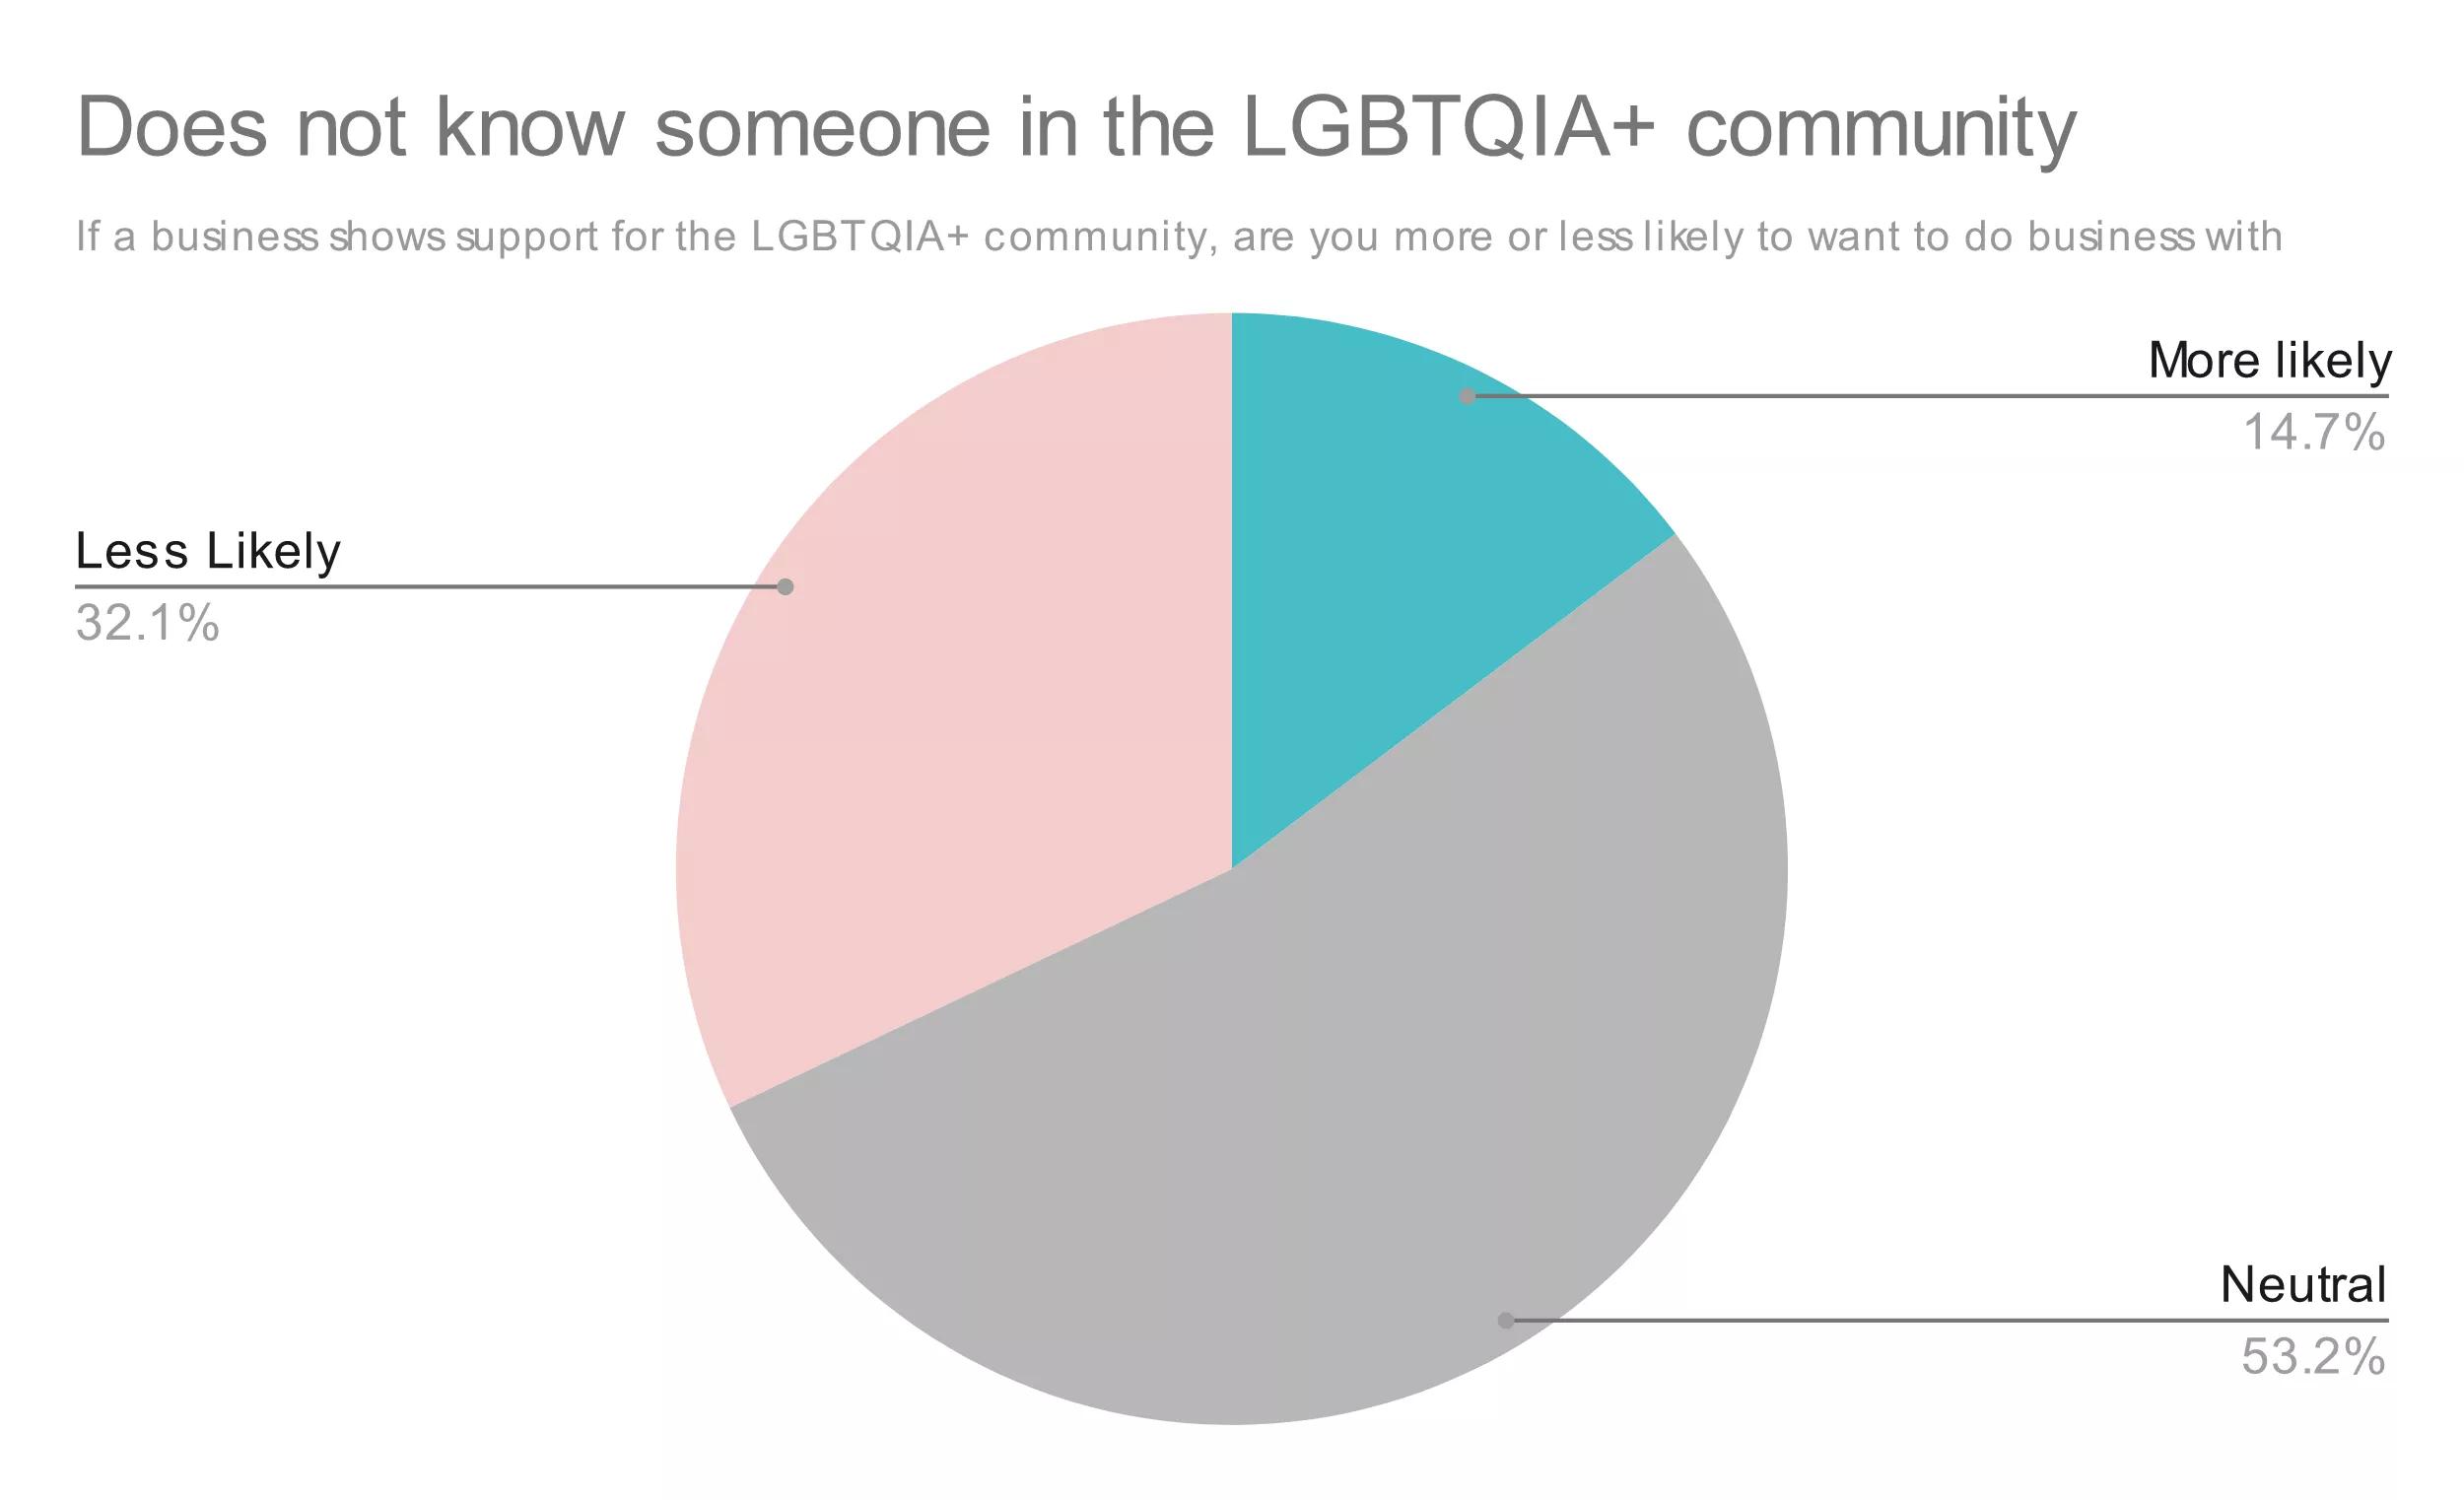 Pie chart showing percentage of people that are less likely, more likely, and neutral to supporting a business that supports LGBTQIA+ when they do not know someone in the LGBTQIA+ community